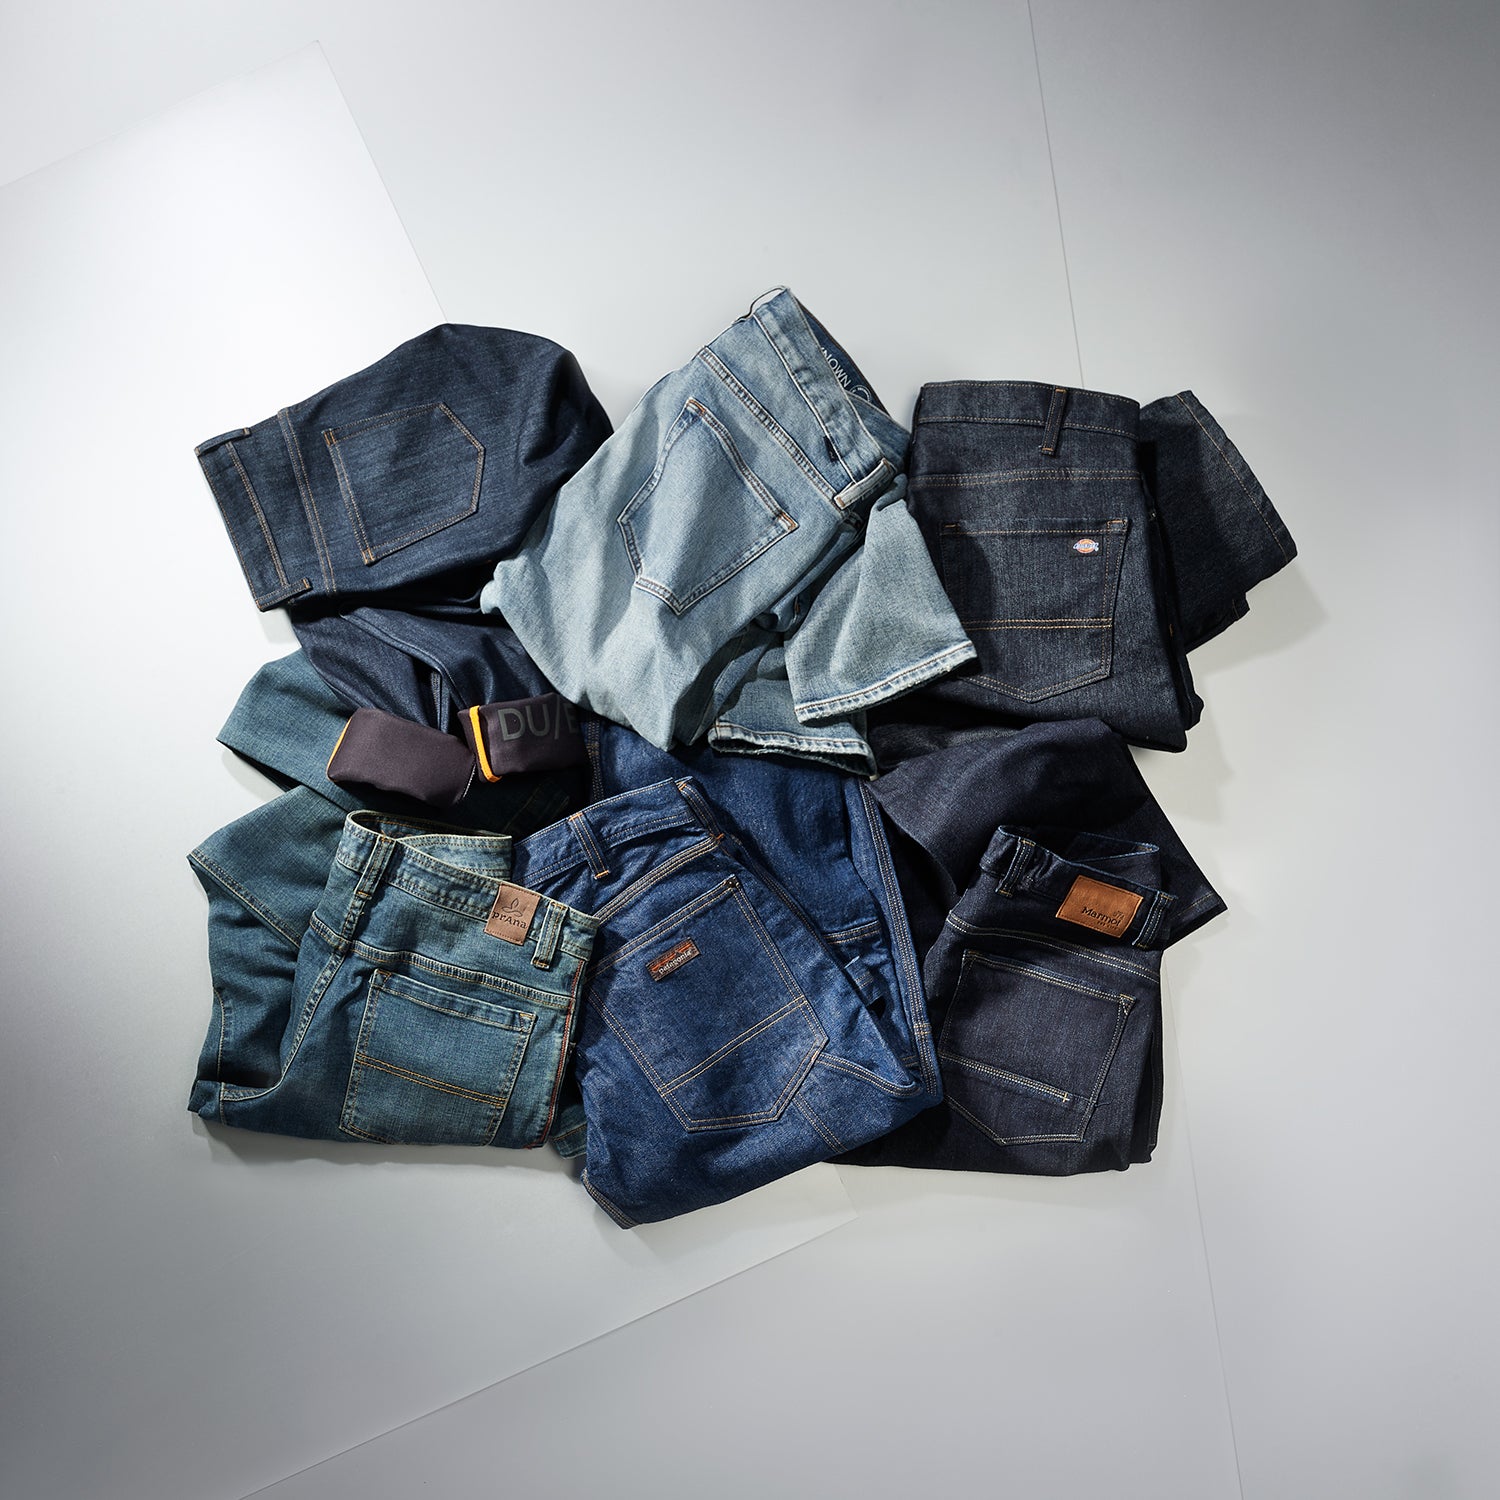 IML JEANS | BESPOKE & PERSONAL | CUSTOM MADE JEANS & MORE